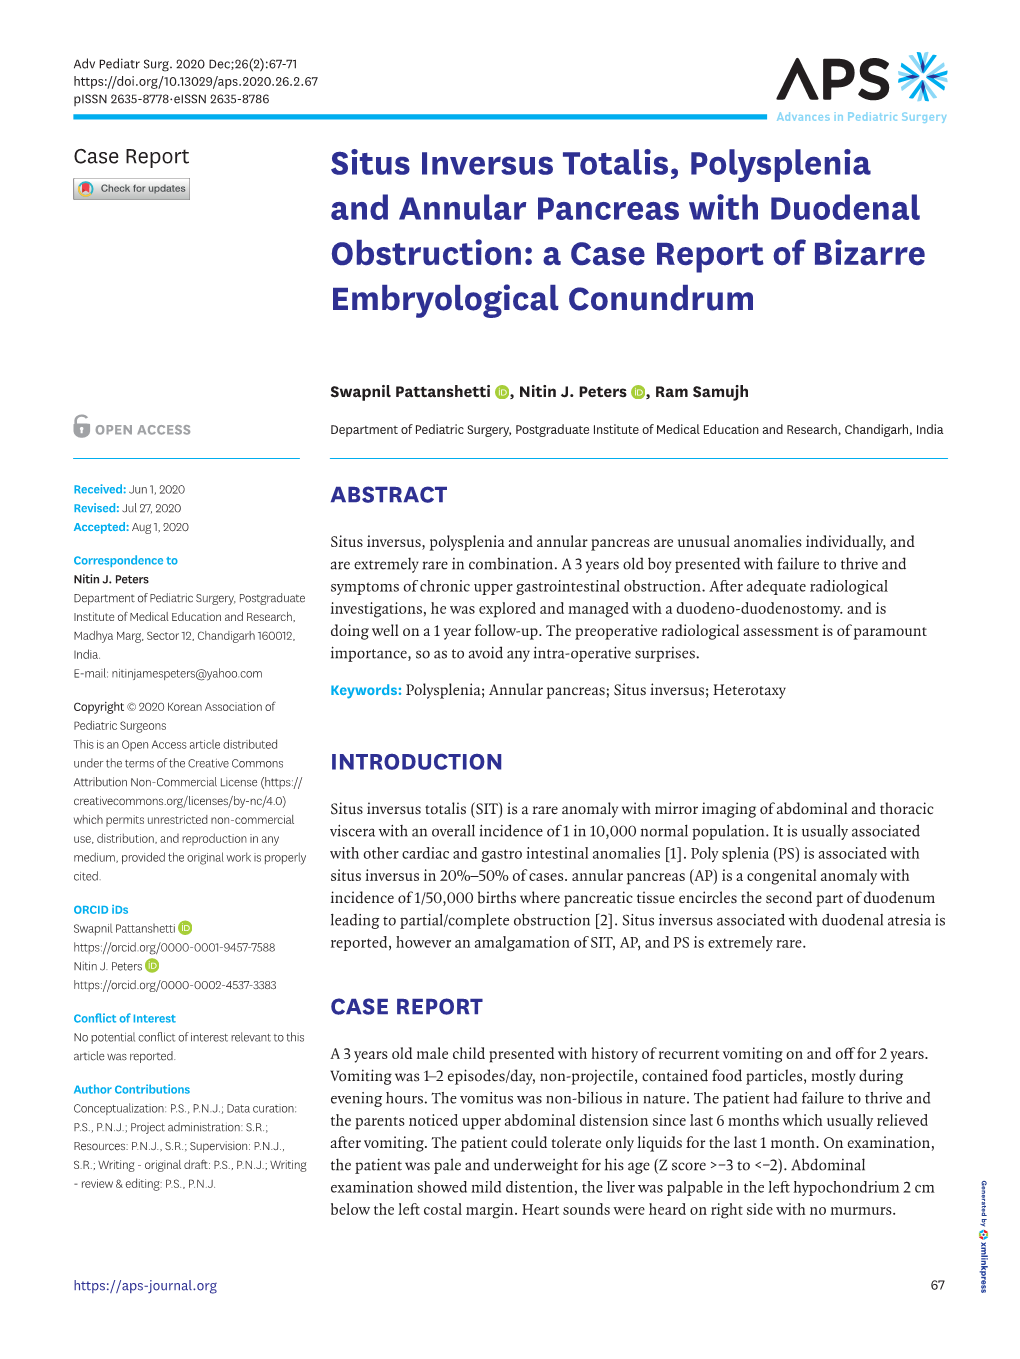 Situs Inversus Totalis, Polysplenia and Annular Pancreas with Duodenal Obstruction: a Case Report of Bizarre Embryological Conundrum